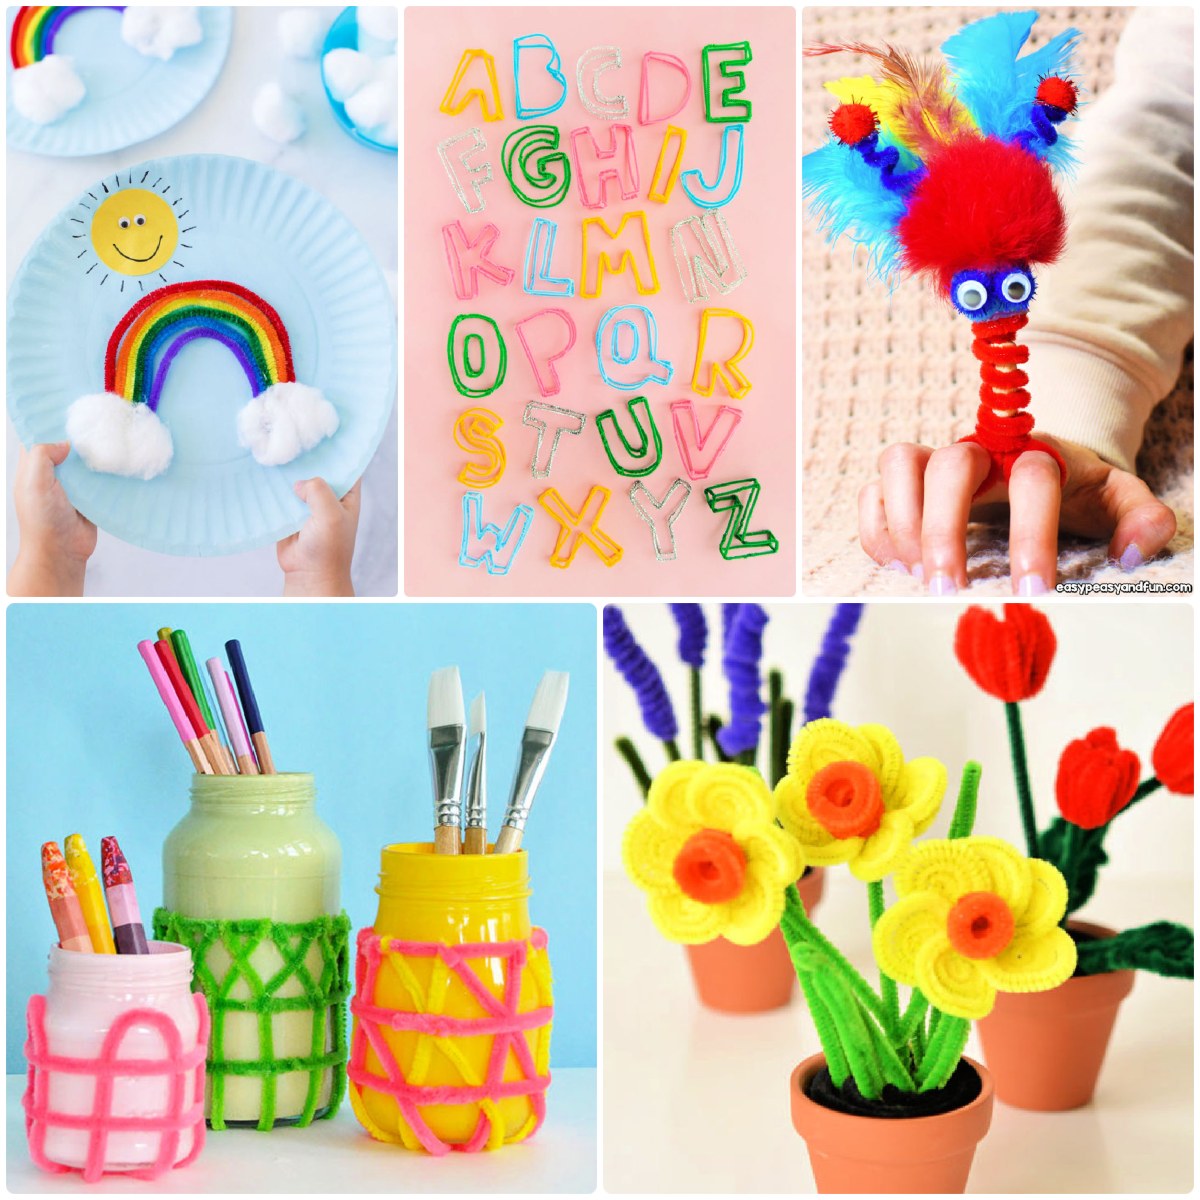 DIY Pipe Cleaners Kit - Daisy